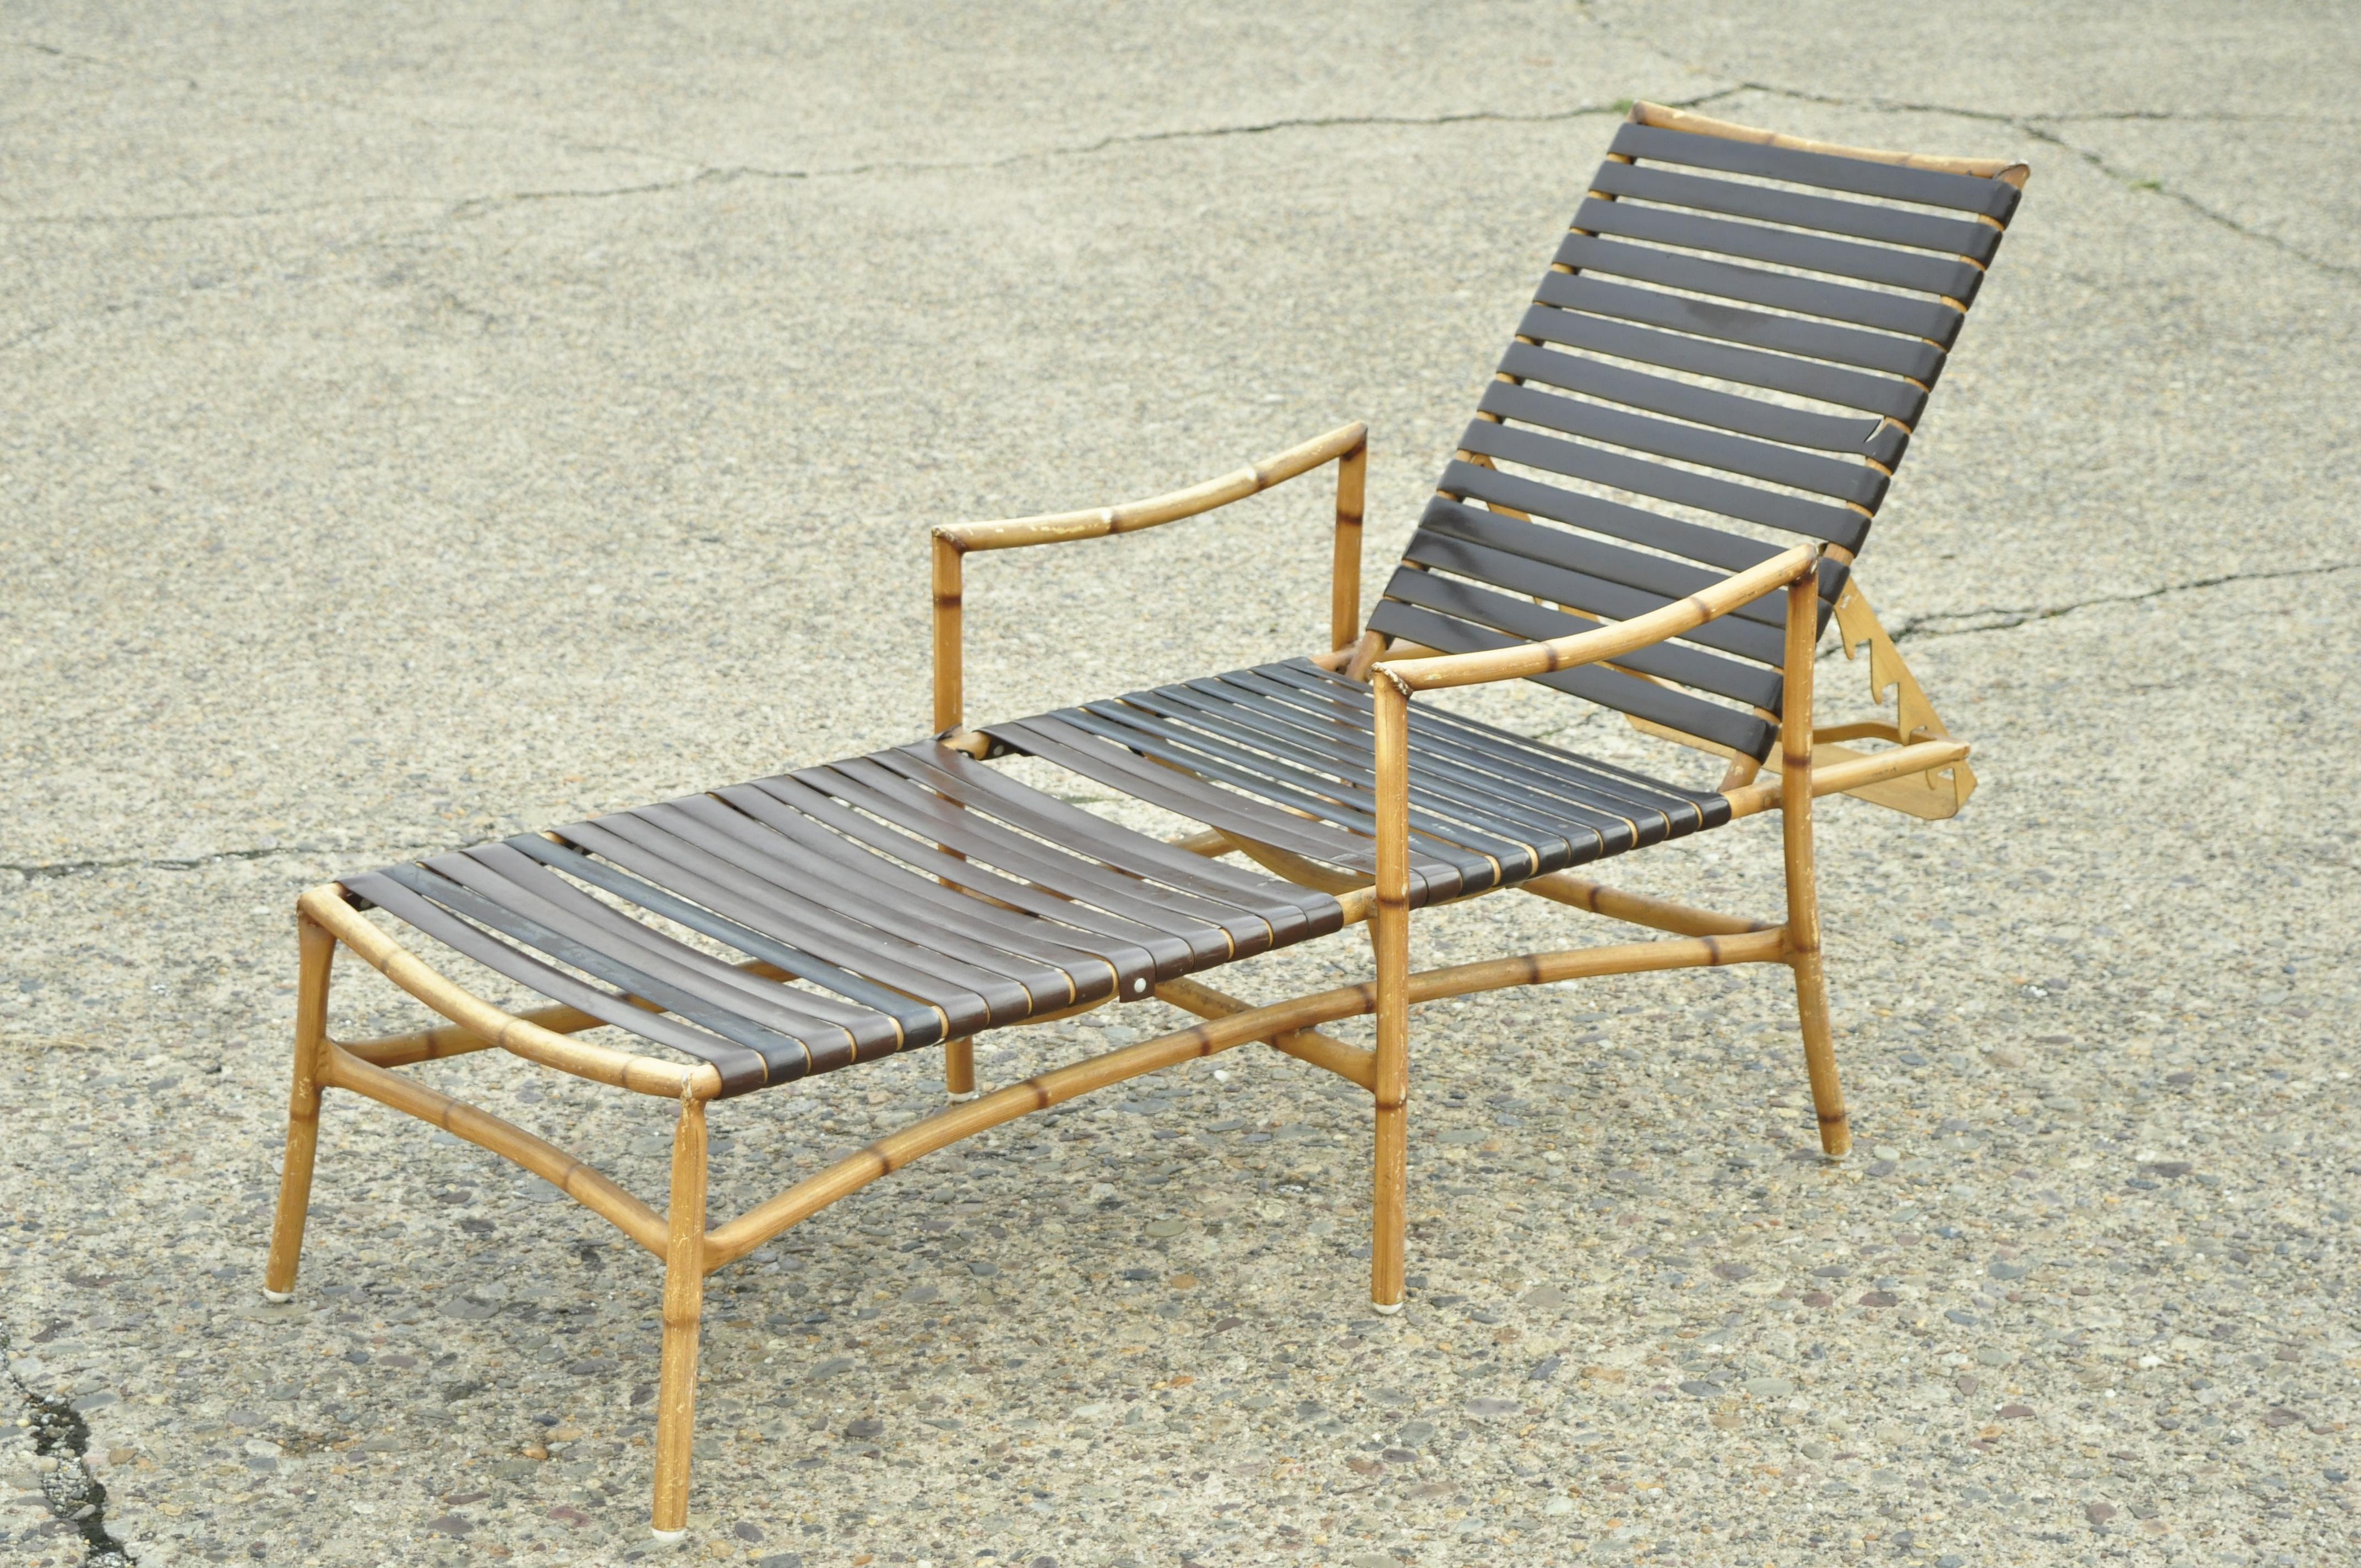 20th century faux bamboo Chinese Chippendale aluminum vinyl strap outdoor patio chaise lounge chairs - a pair. Item features a rubberized vinyl strap, faux bamboo design, adjustable backs, cast aluminum construction, great style and form, circa late